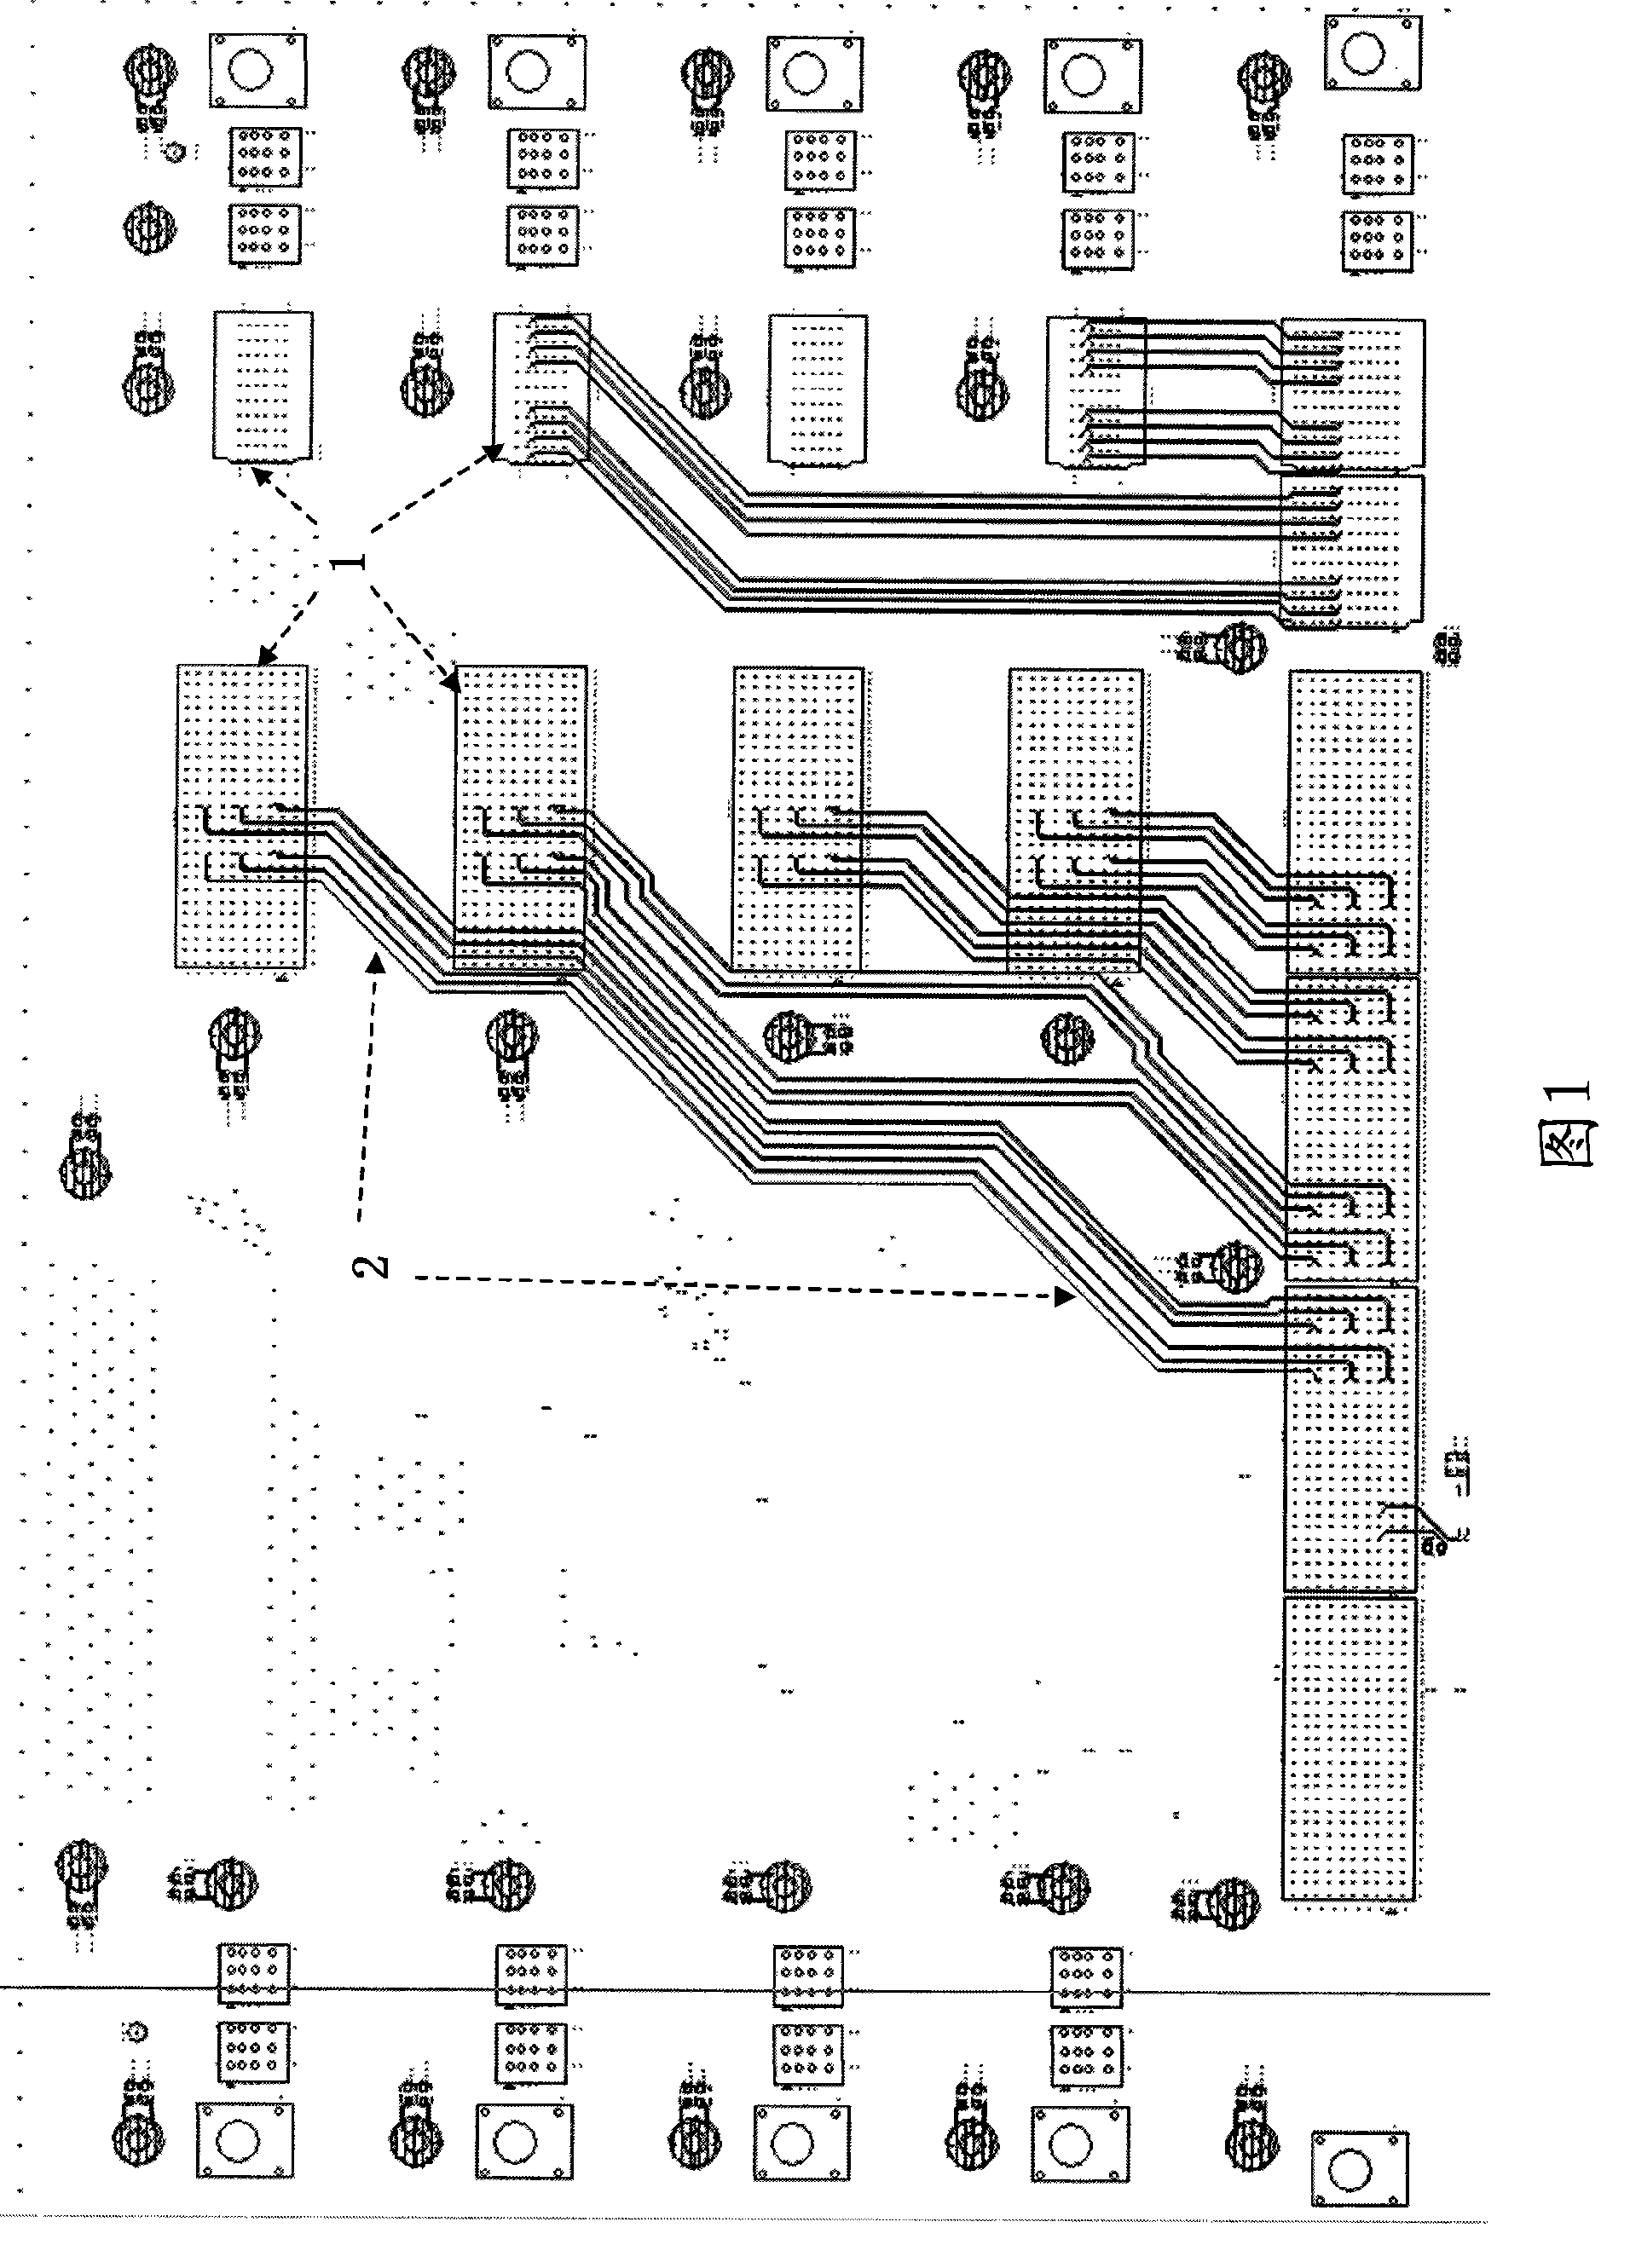 Method and apparatus for multiplexing connector